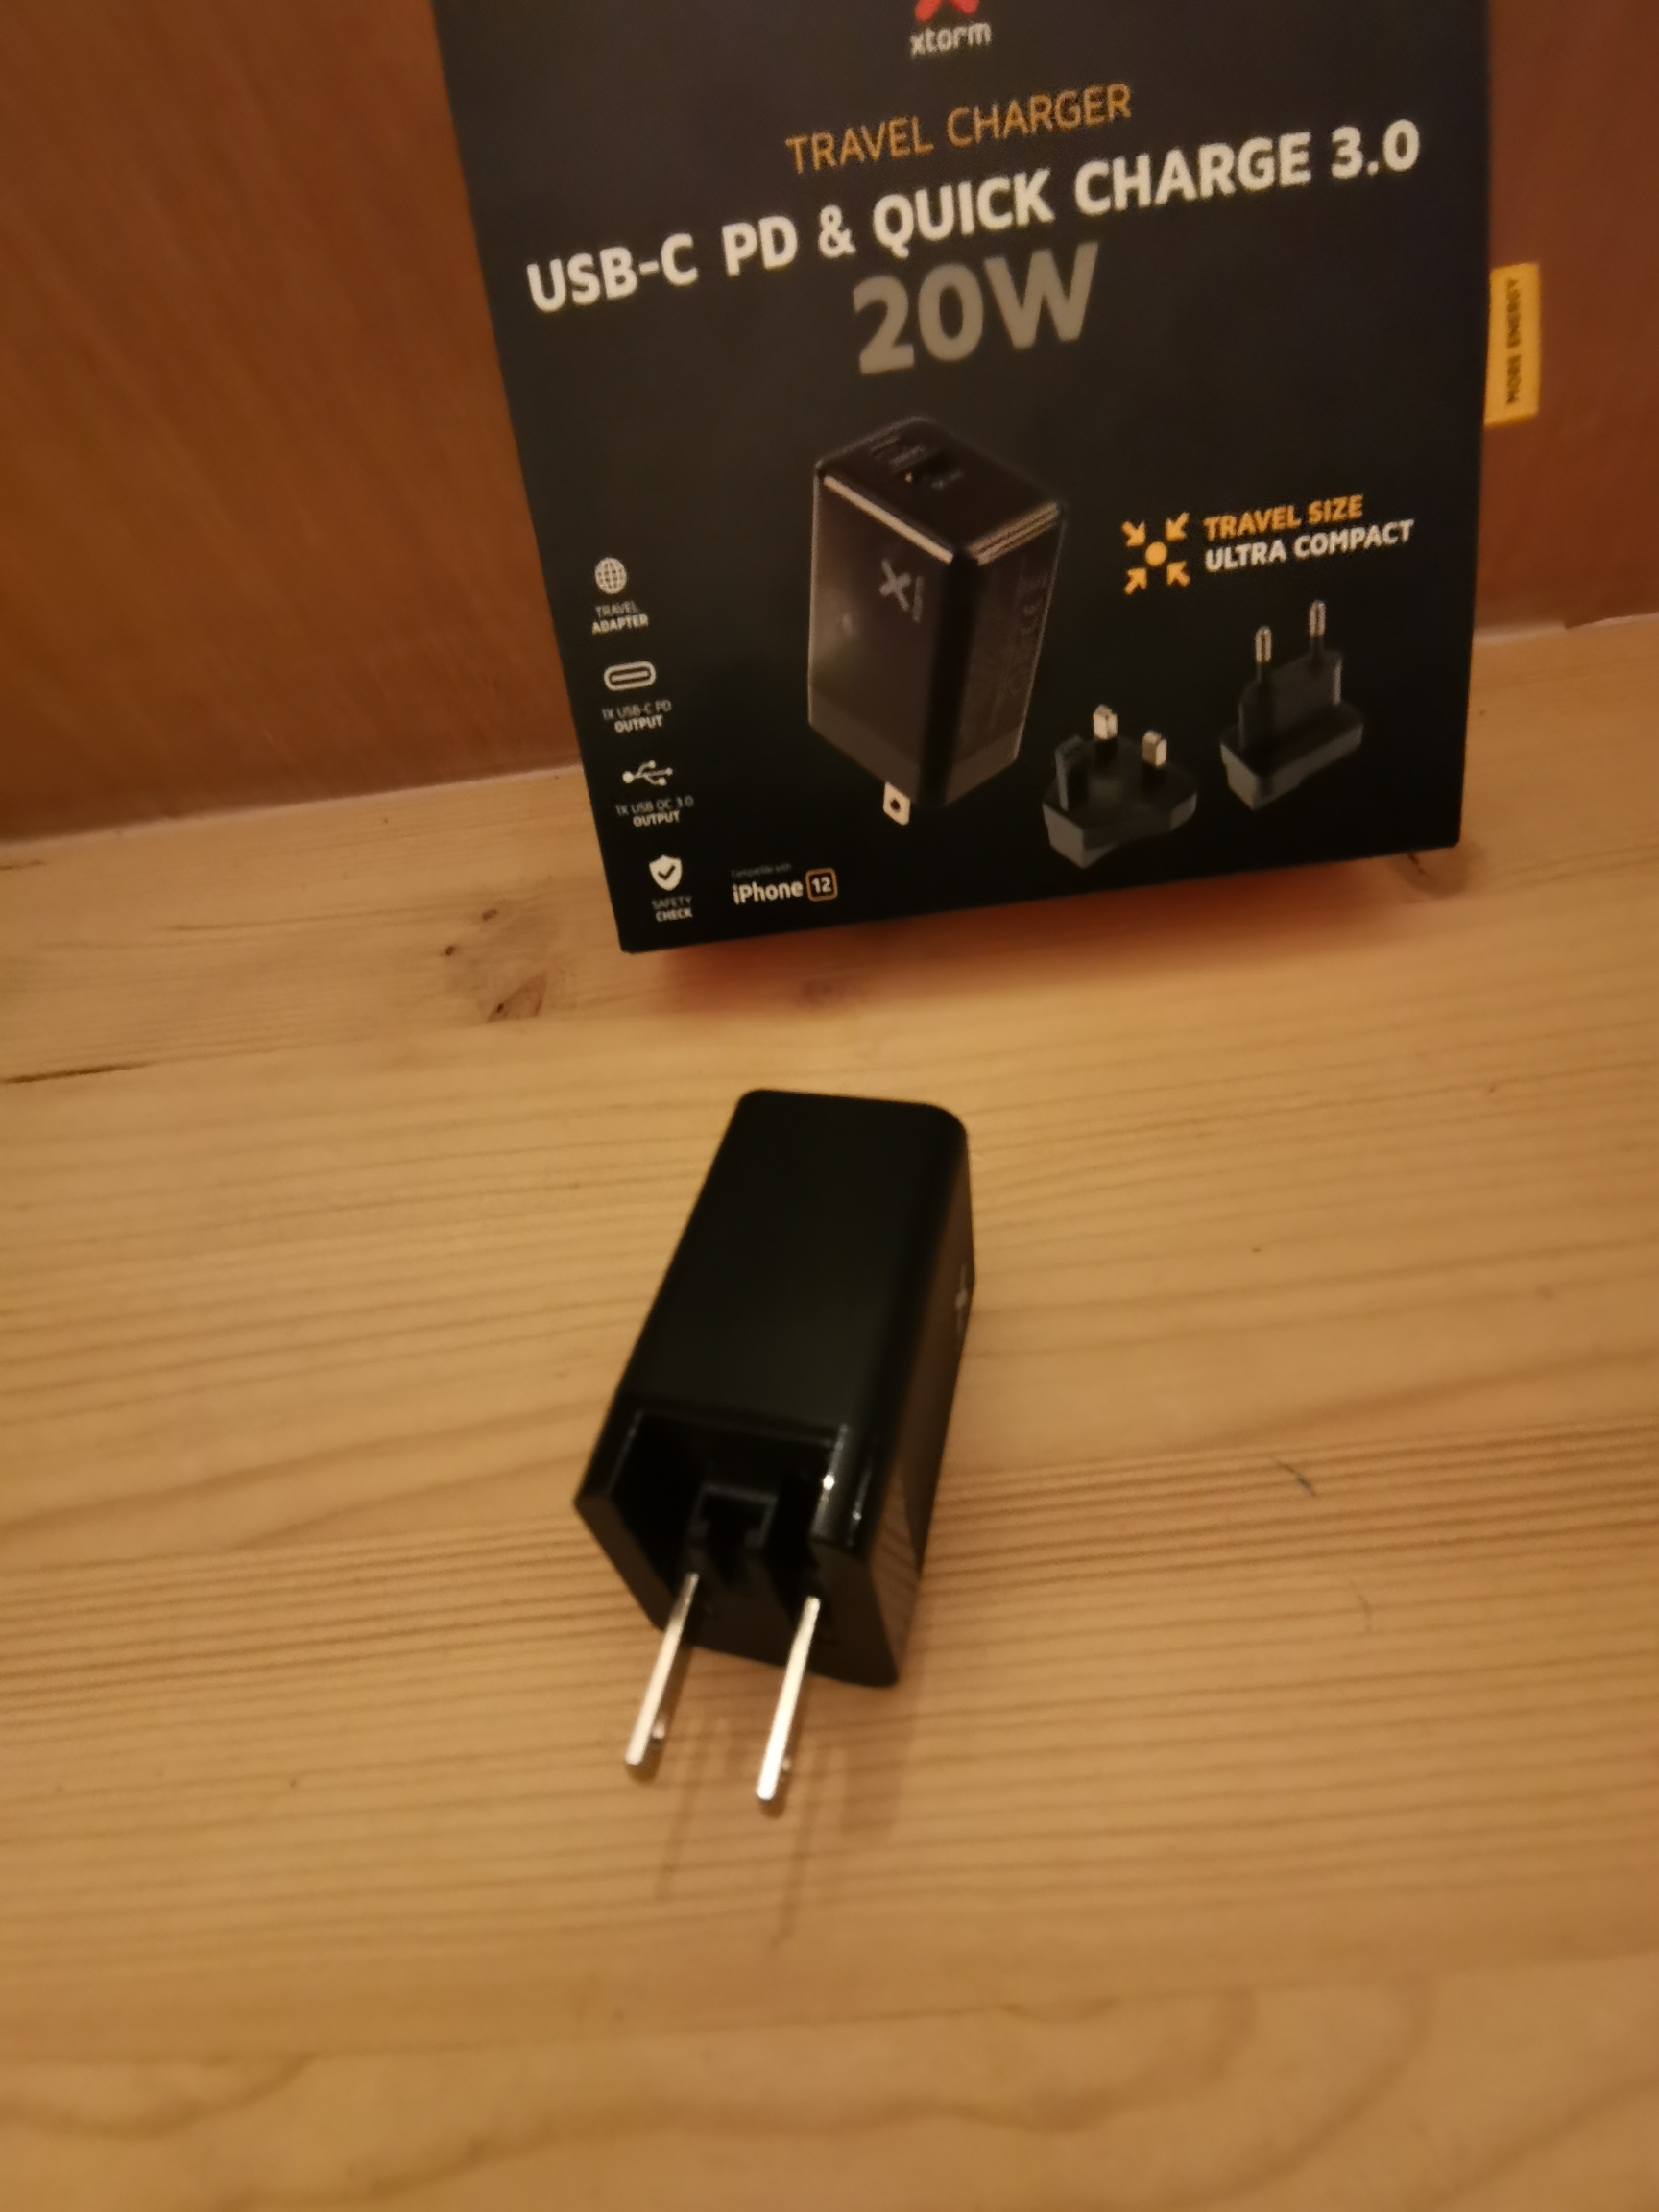 Xtorm Volt Series Travel Charger USB-C PD & Quick Charge 3.0